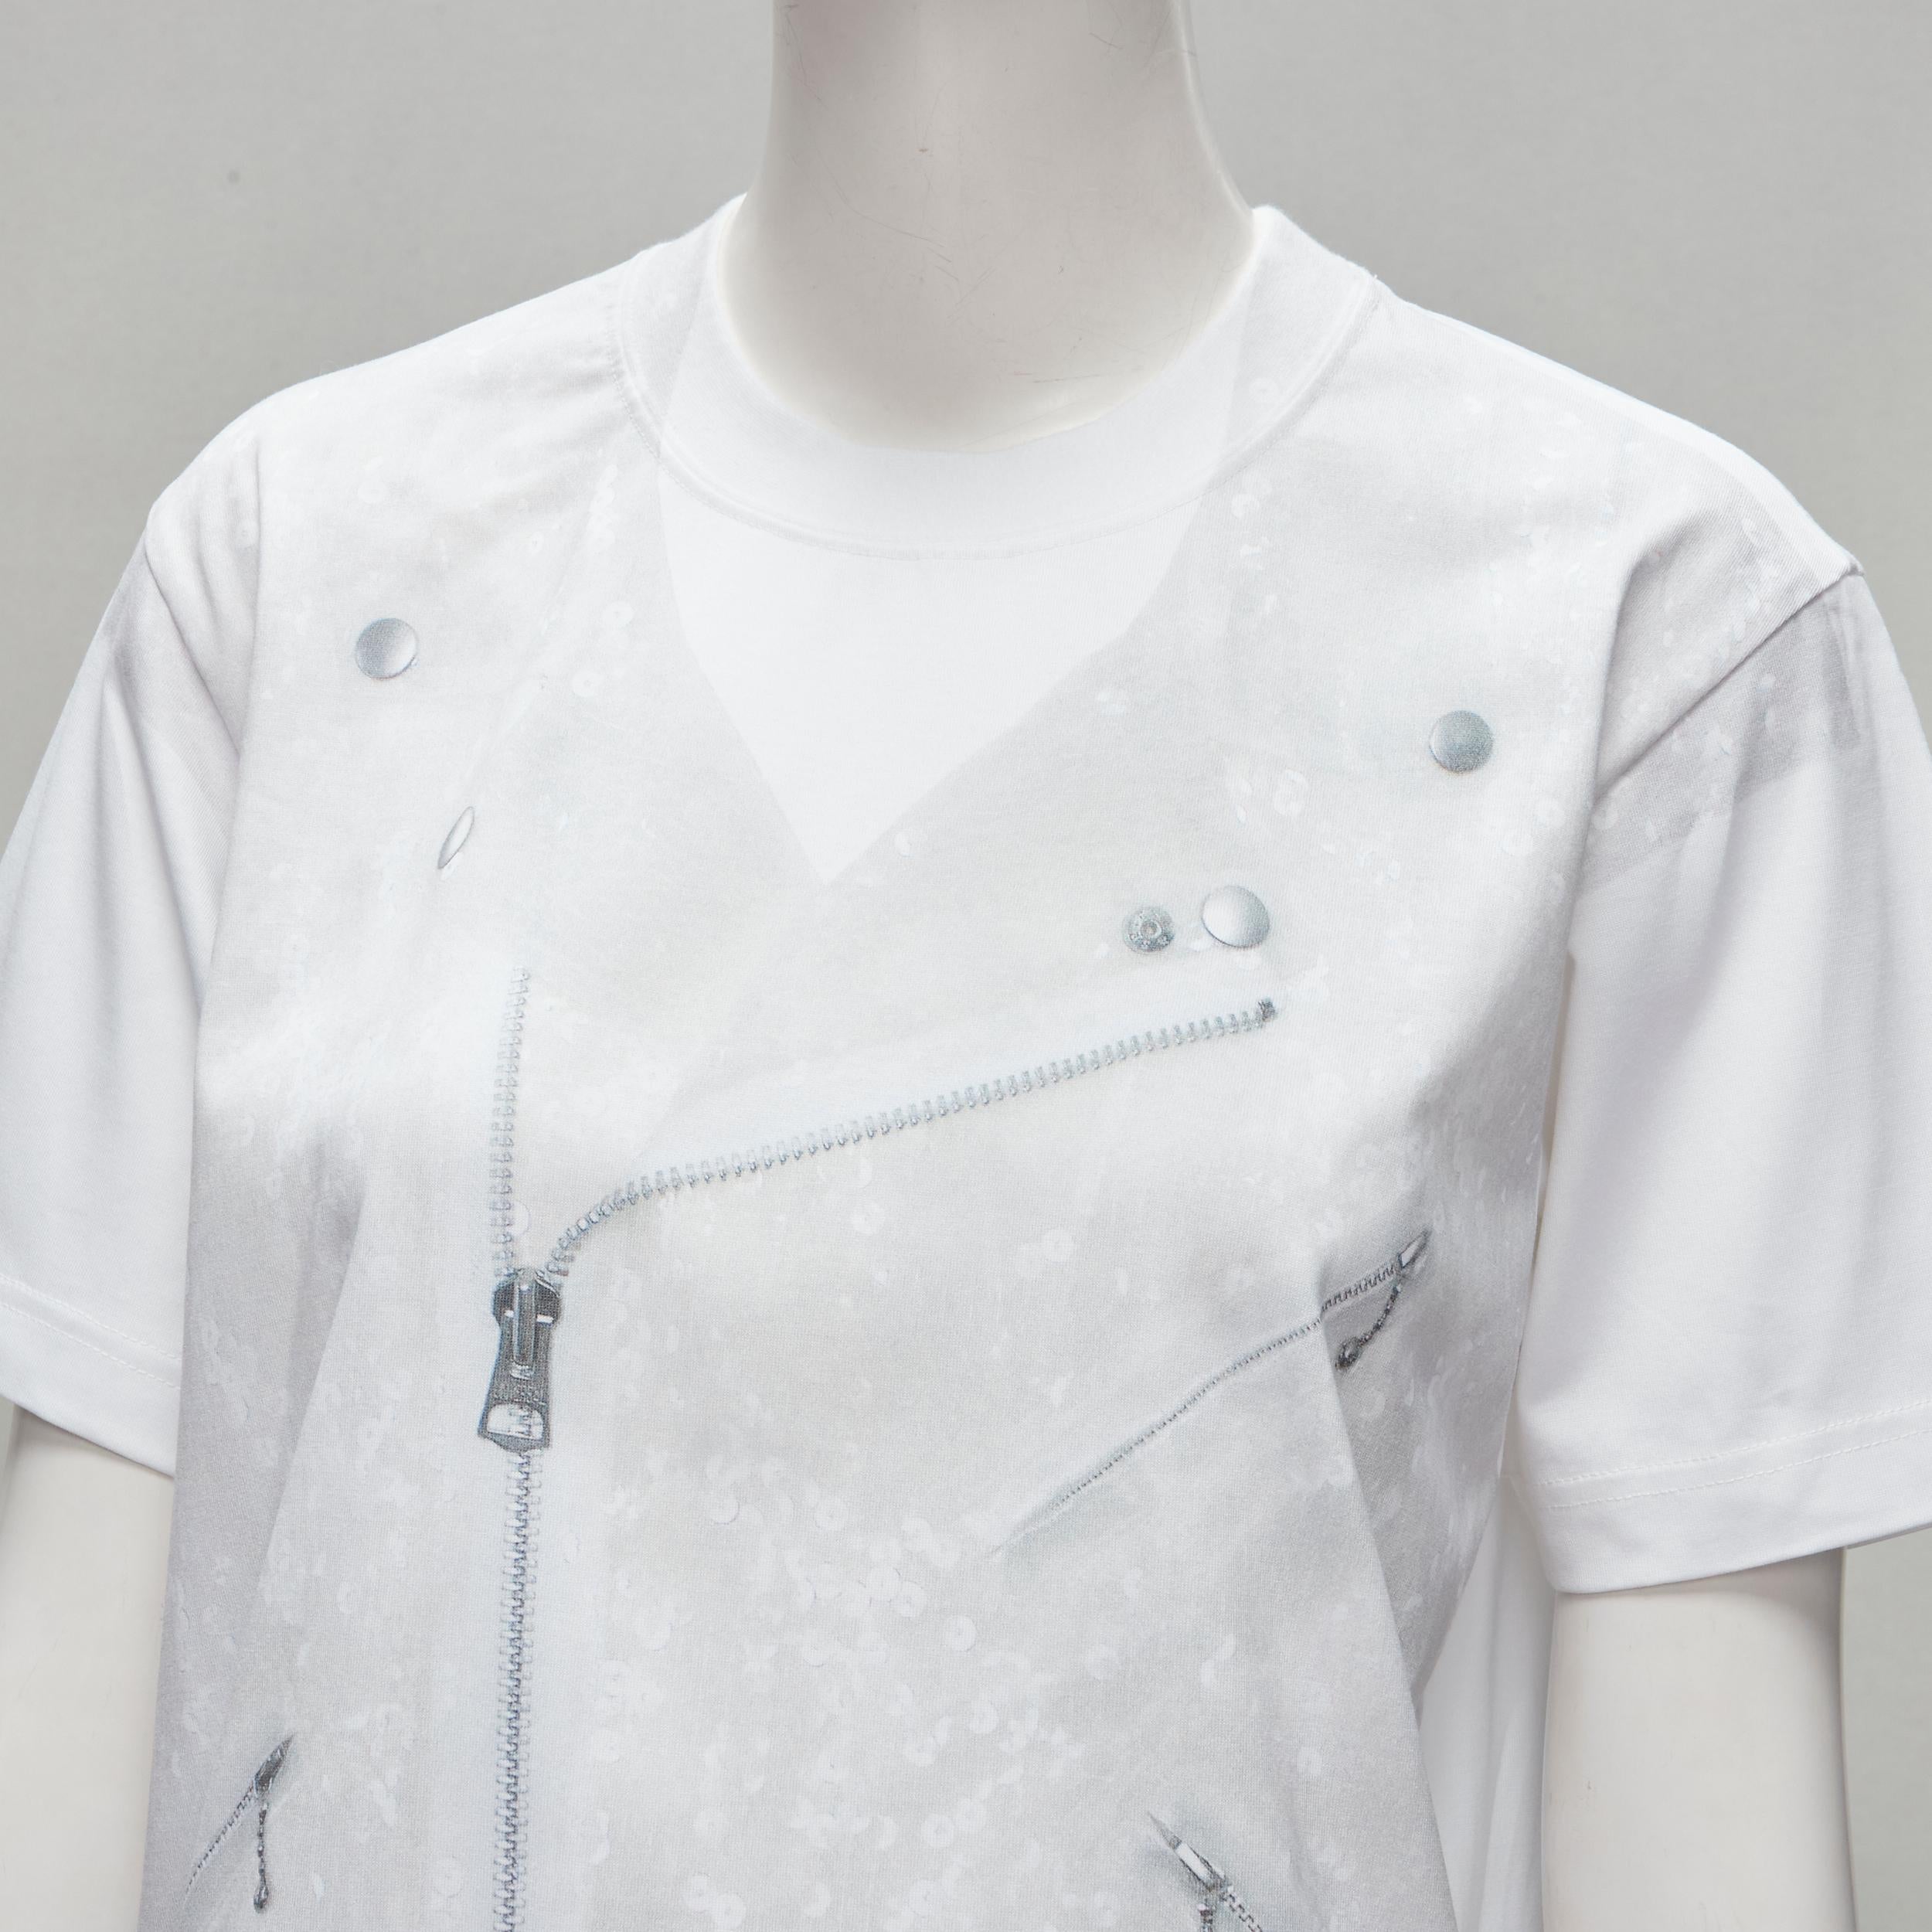 JUNYA WATANABE 2020 grey sequin biker print white cotton tshirt top S
Reference: AAWC/A00210
Brand: Junya Watanabe
Designer: Junya Watanabe
Collection: 2020
Material: Cotton
Color: Grey, White
Pattern: Photographic Print
Closure: Pullover
Made in: